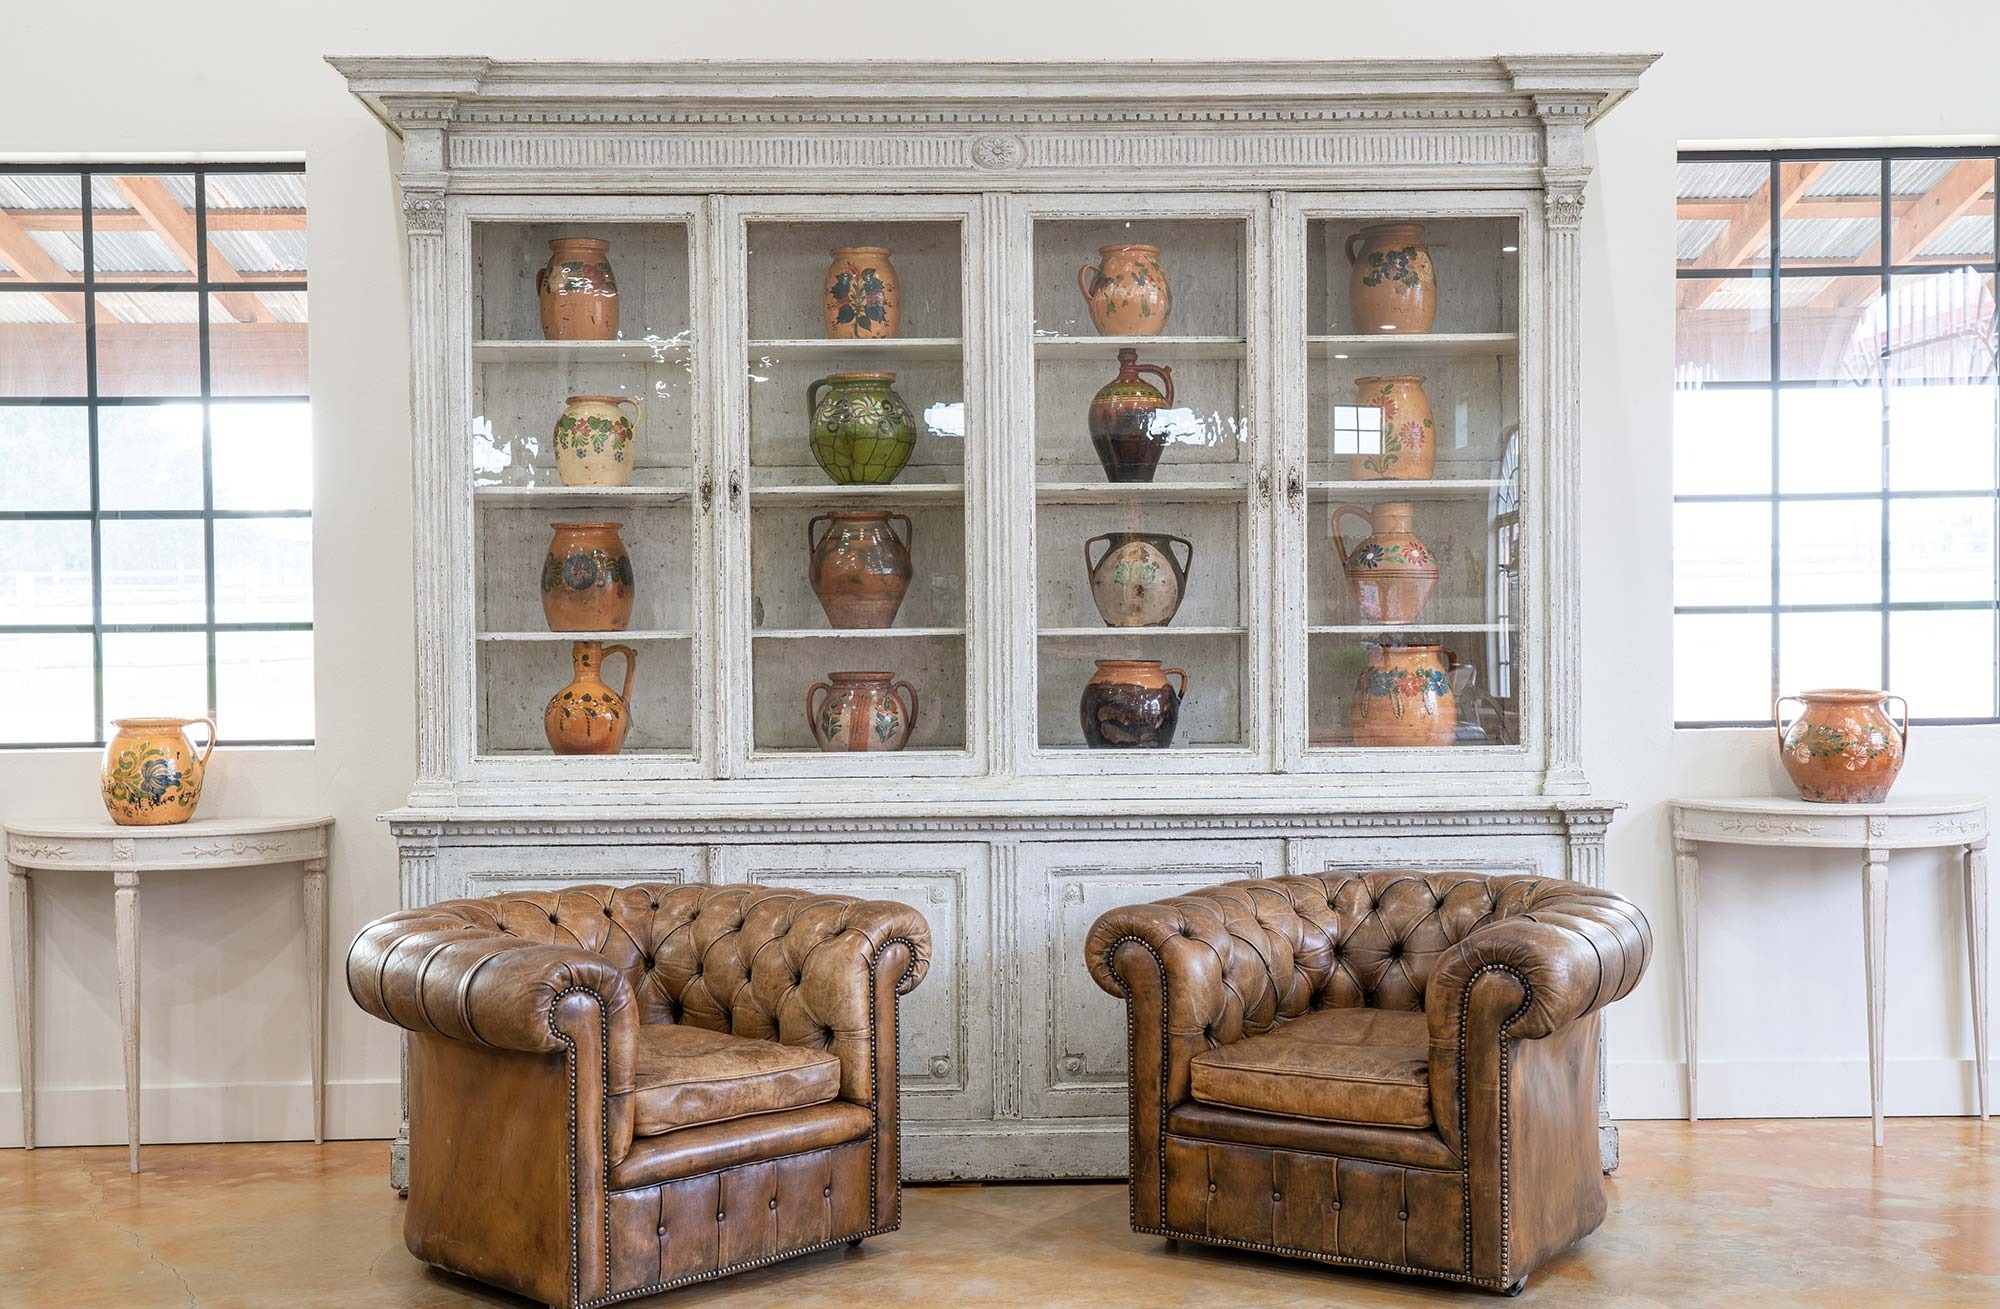 Elegant display of authentic Scandinavian and Hungarian antiques featuring hand-carved Swedish furniture Danish mid-century modern pieces and intricate Hungarian ceramics reflecting the rich cultural heritage of each country